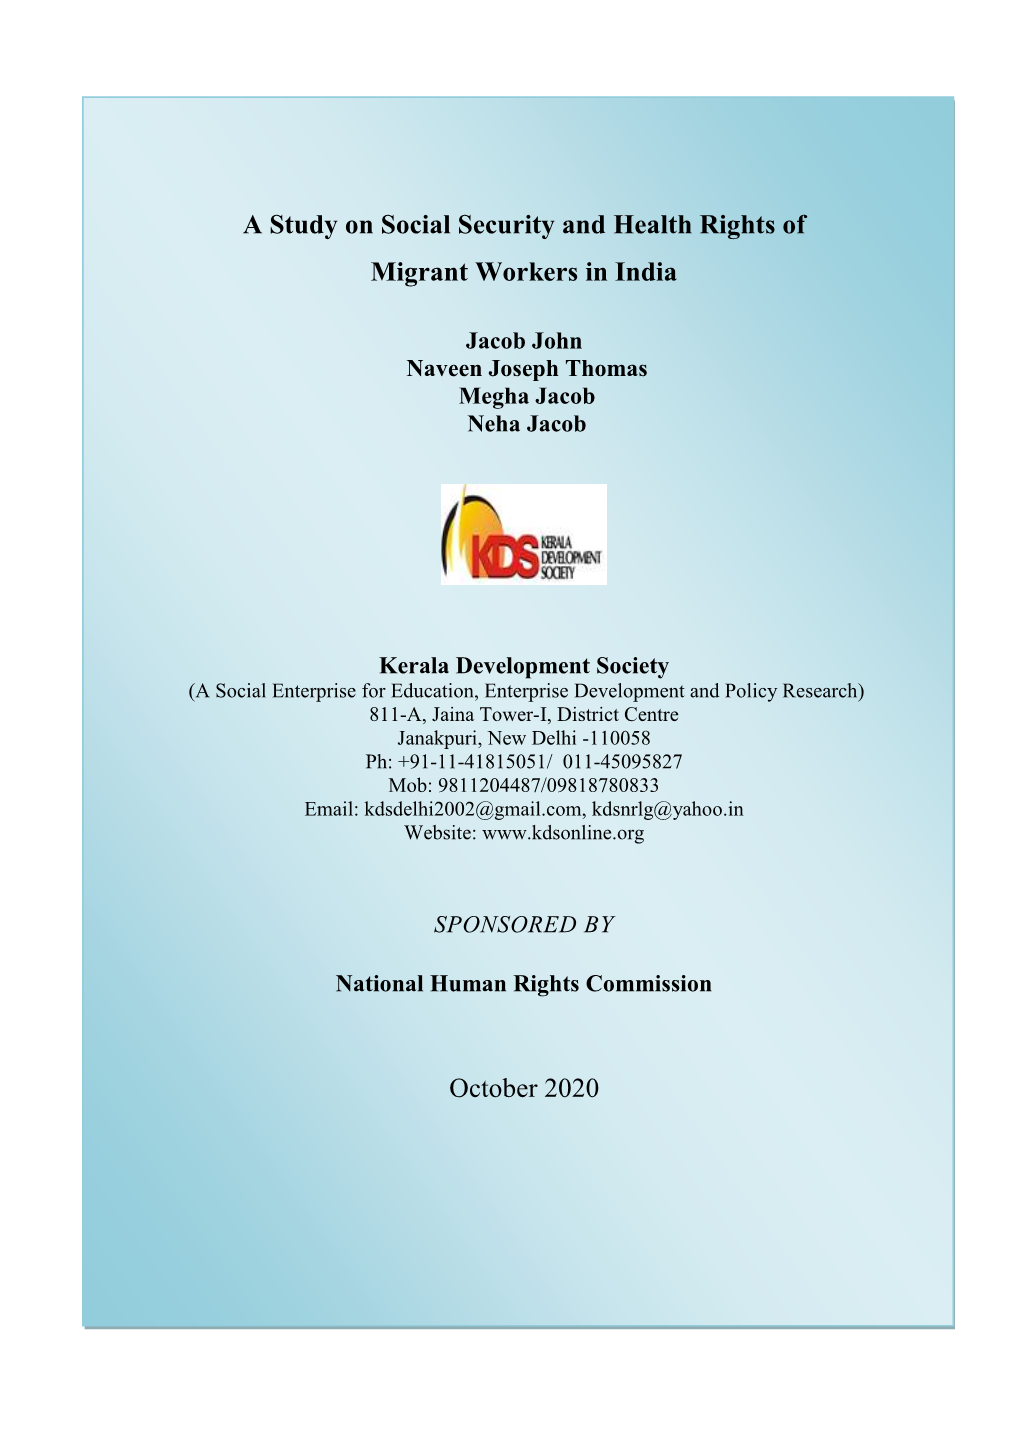 A Study on Social Security and Health Rights of Migrant Workers in India